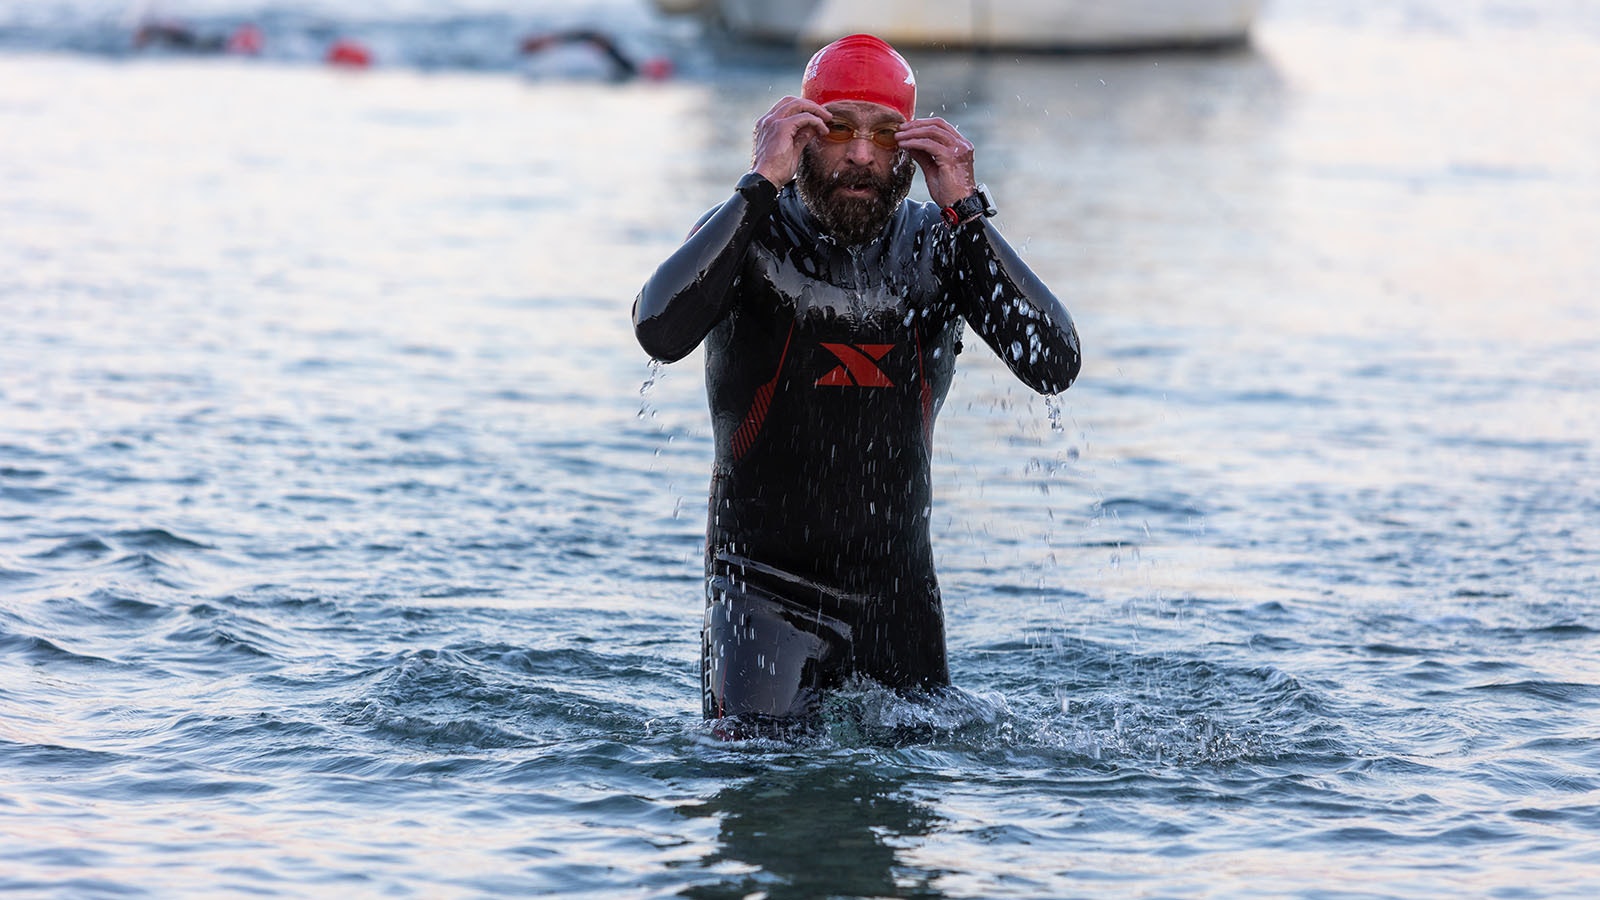 Steve Bang finishes the swim part of the triathlon in the Adriatic Sea.